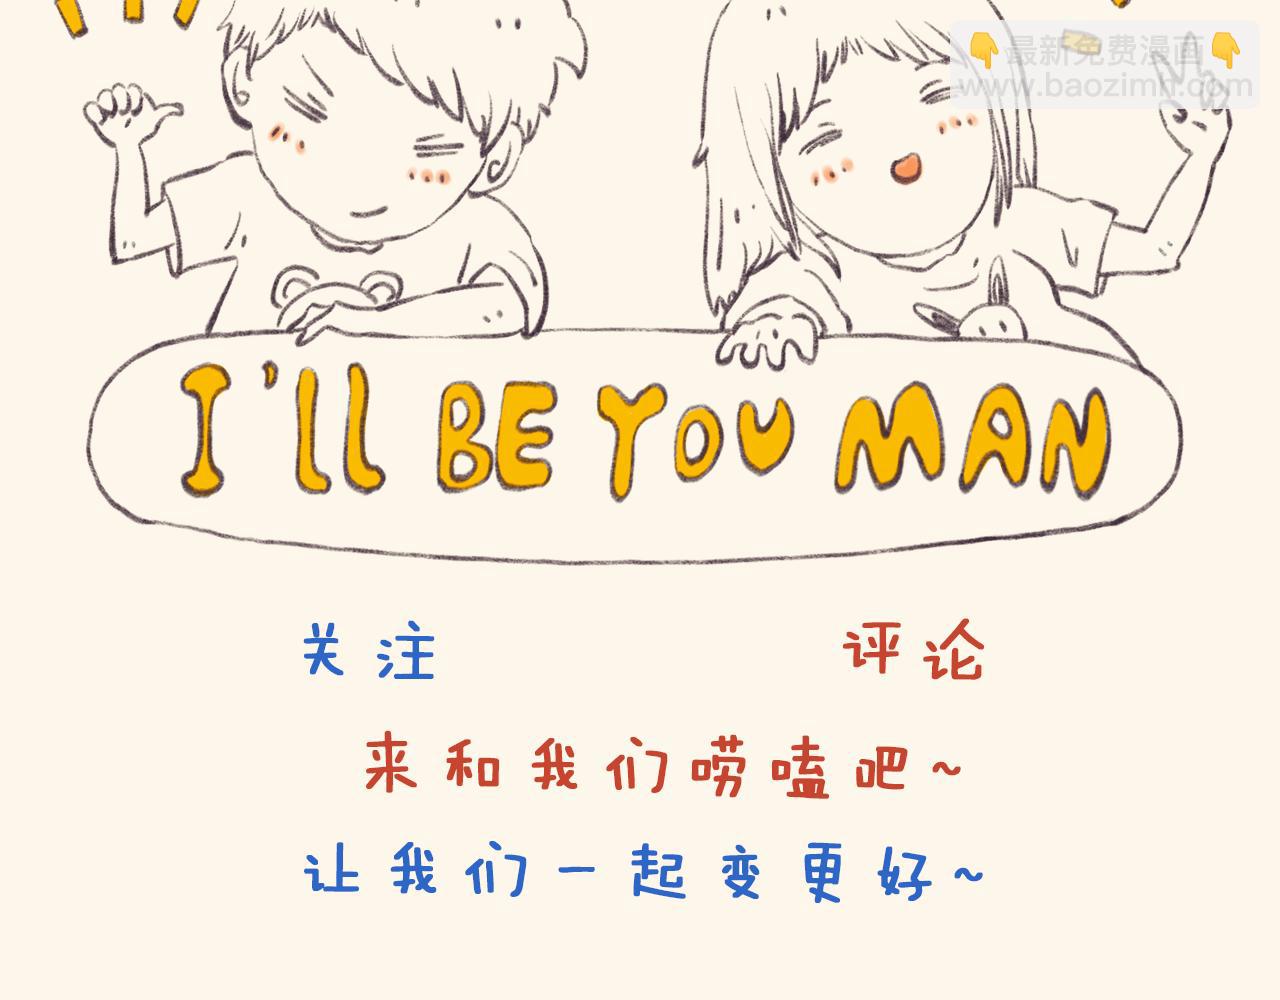 I WELL BE YOU MAN - 3.早餐 - 2